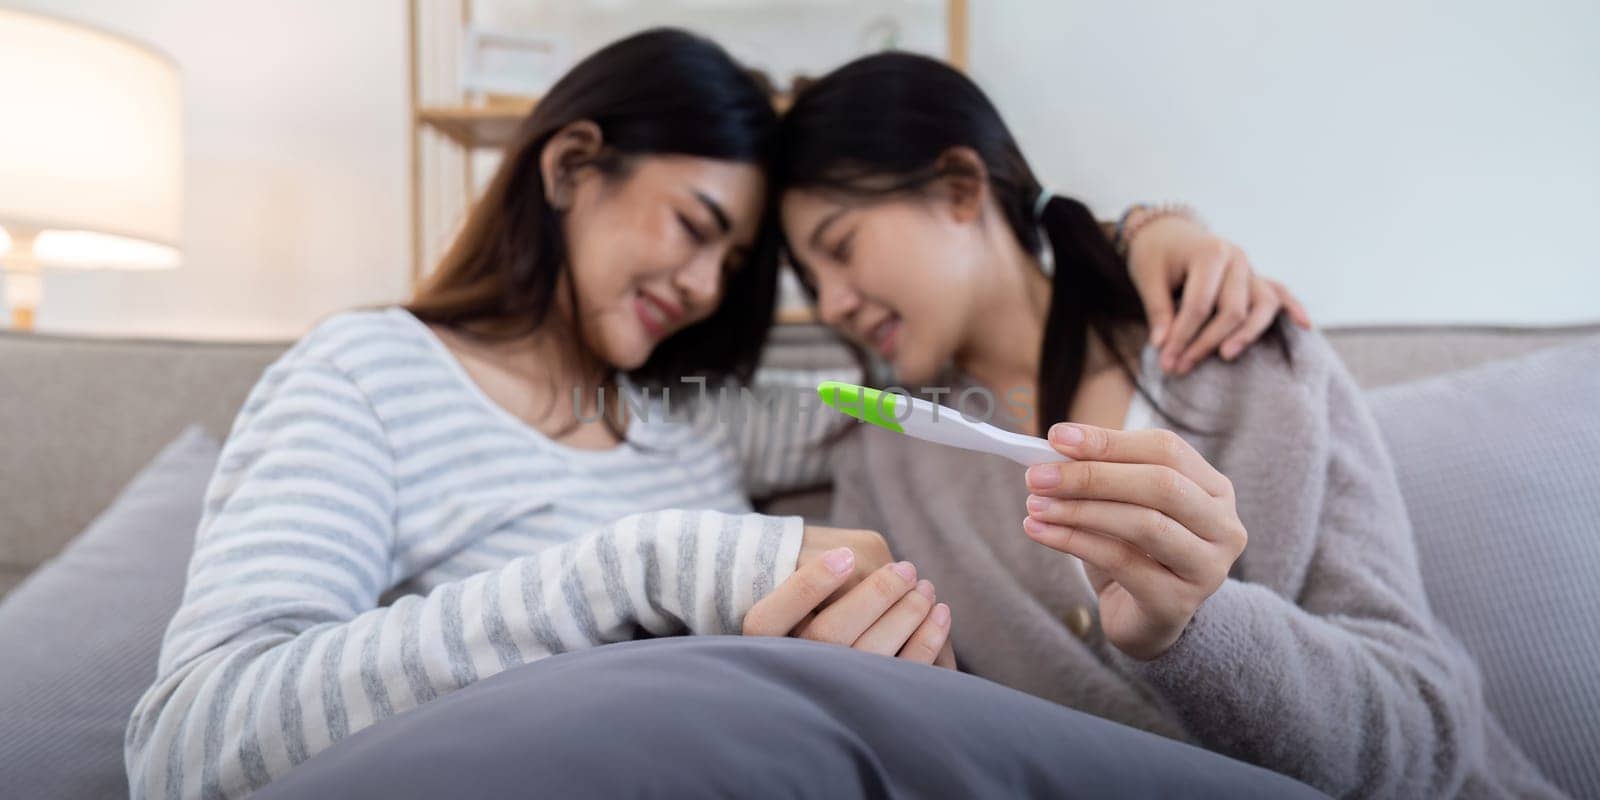 Couple smiling while looking at a positive pregnancy test on the couch at home. Women sharing a joyful moment anticipating parenthood together by nateemee